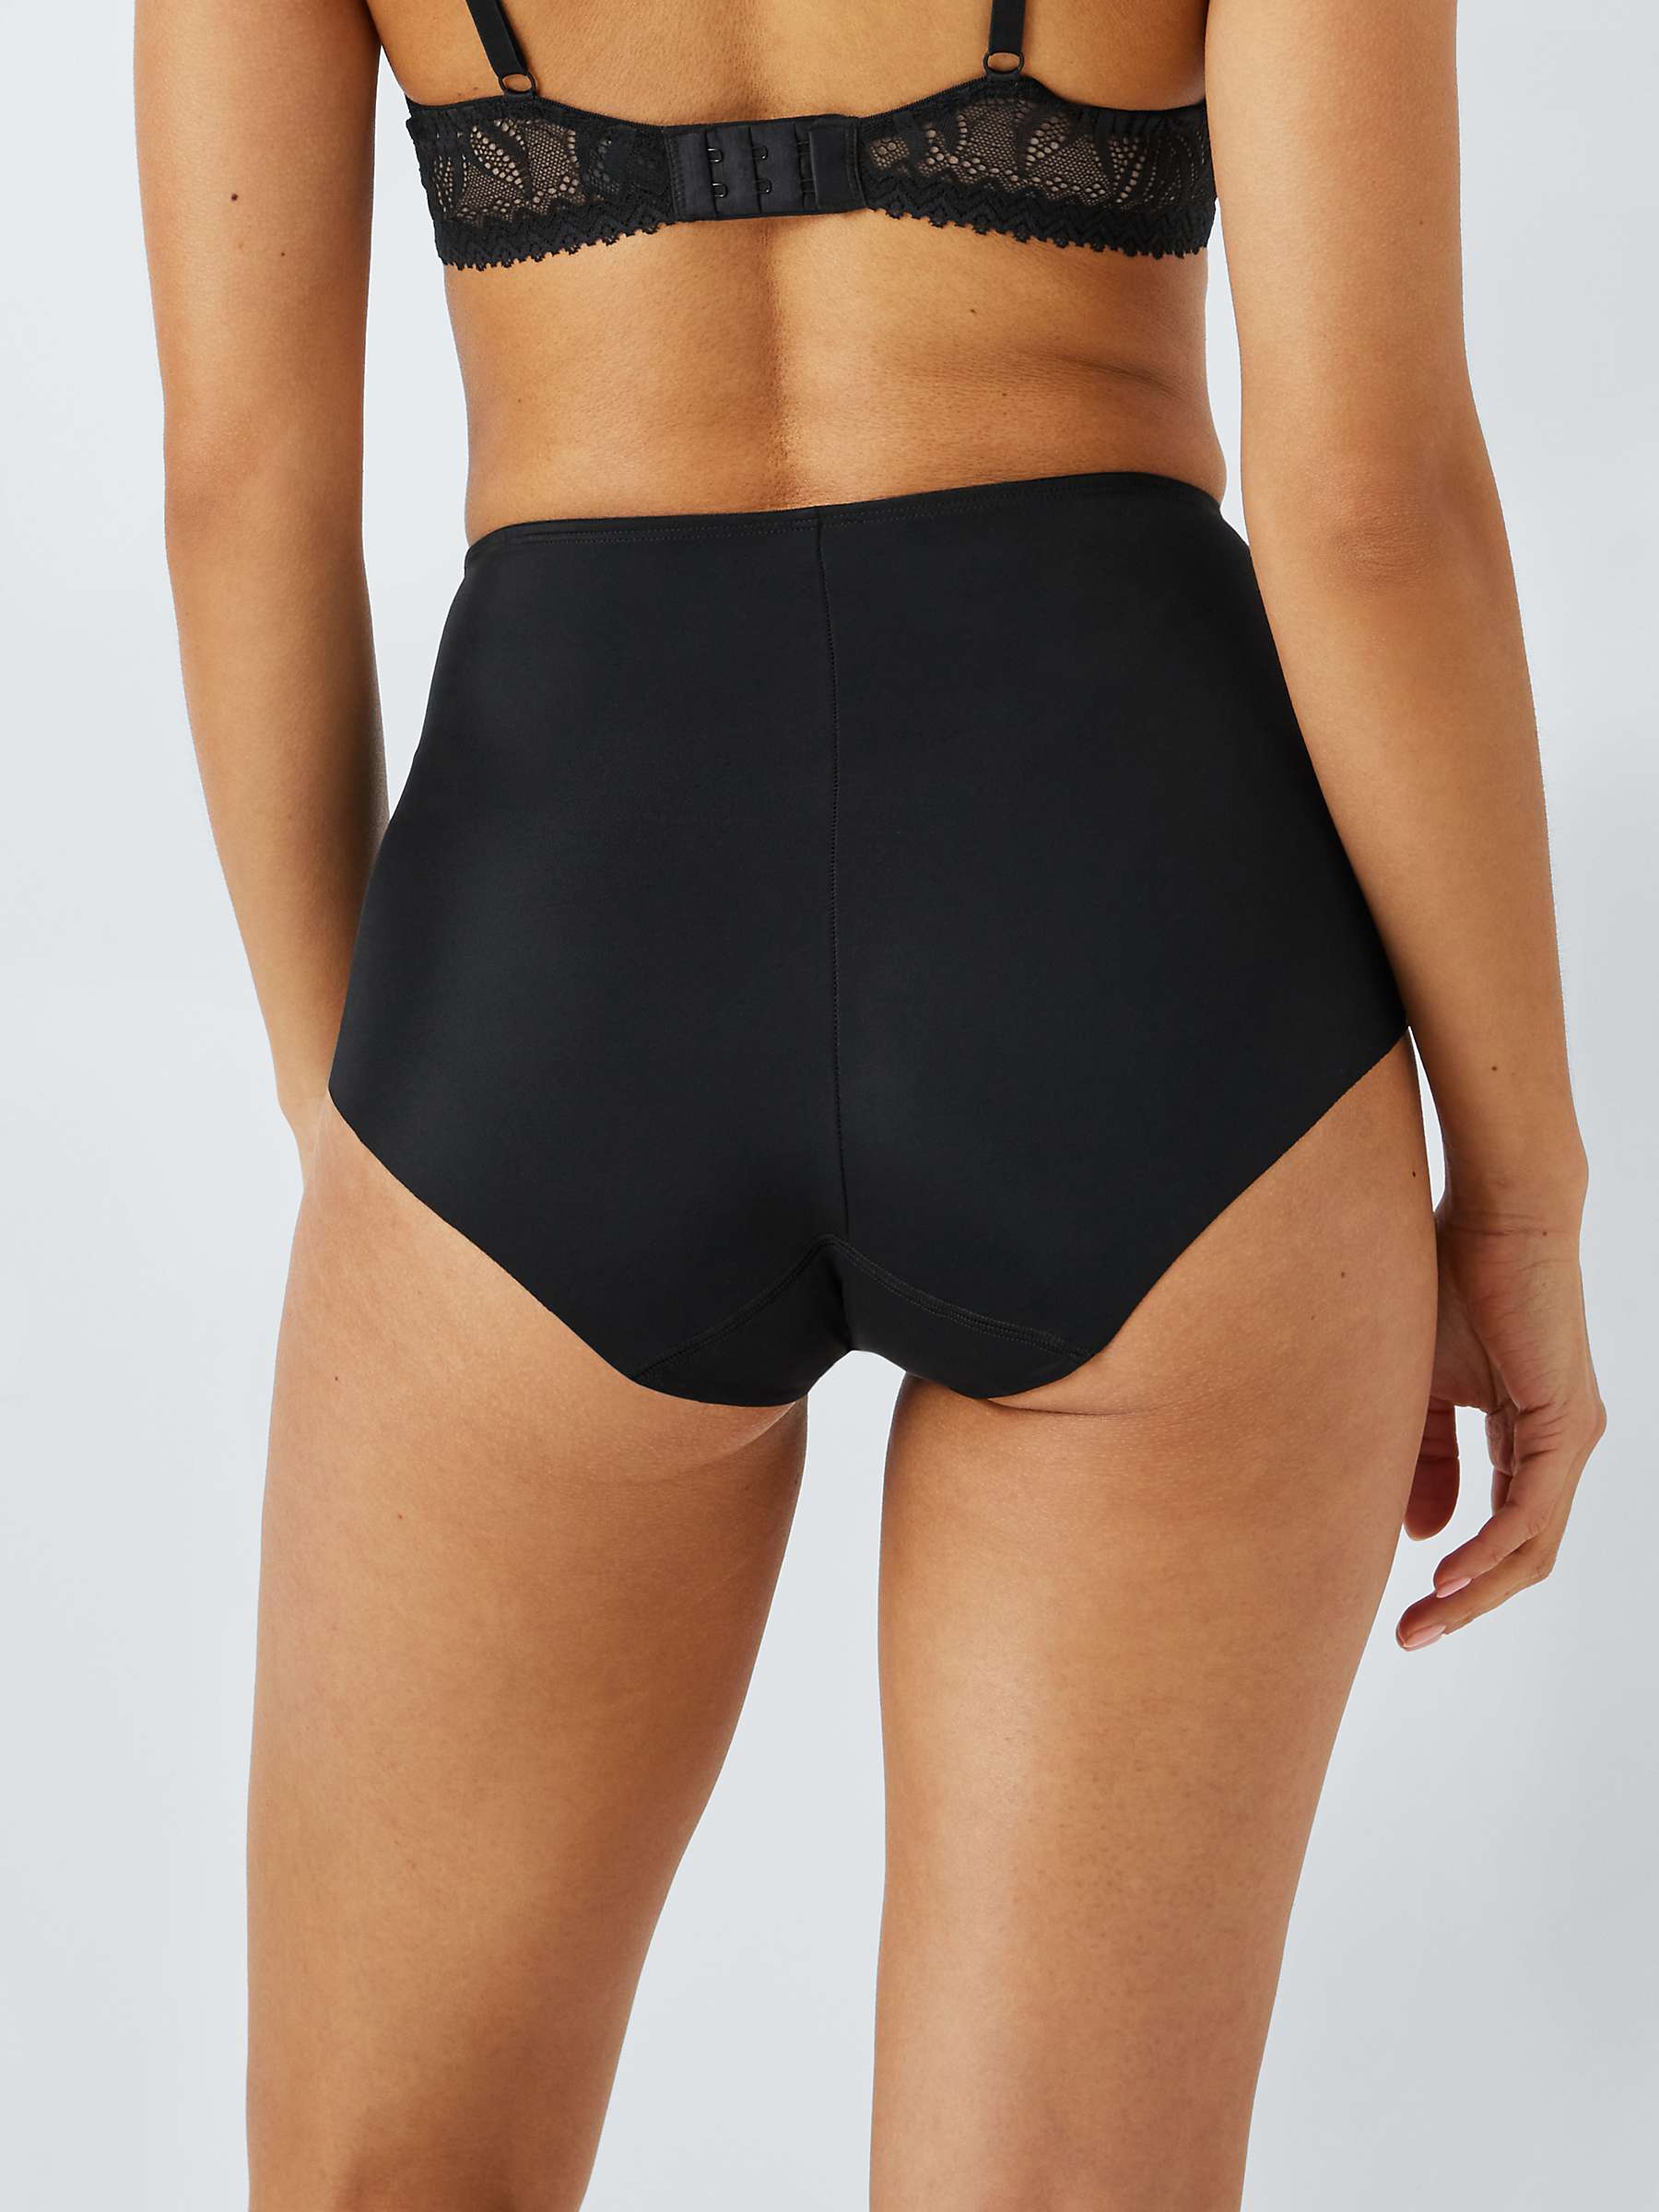 Buy John Lewis ANYDAY Full Shaping Knickers, Pack of 2 Online at johnlewis.com